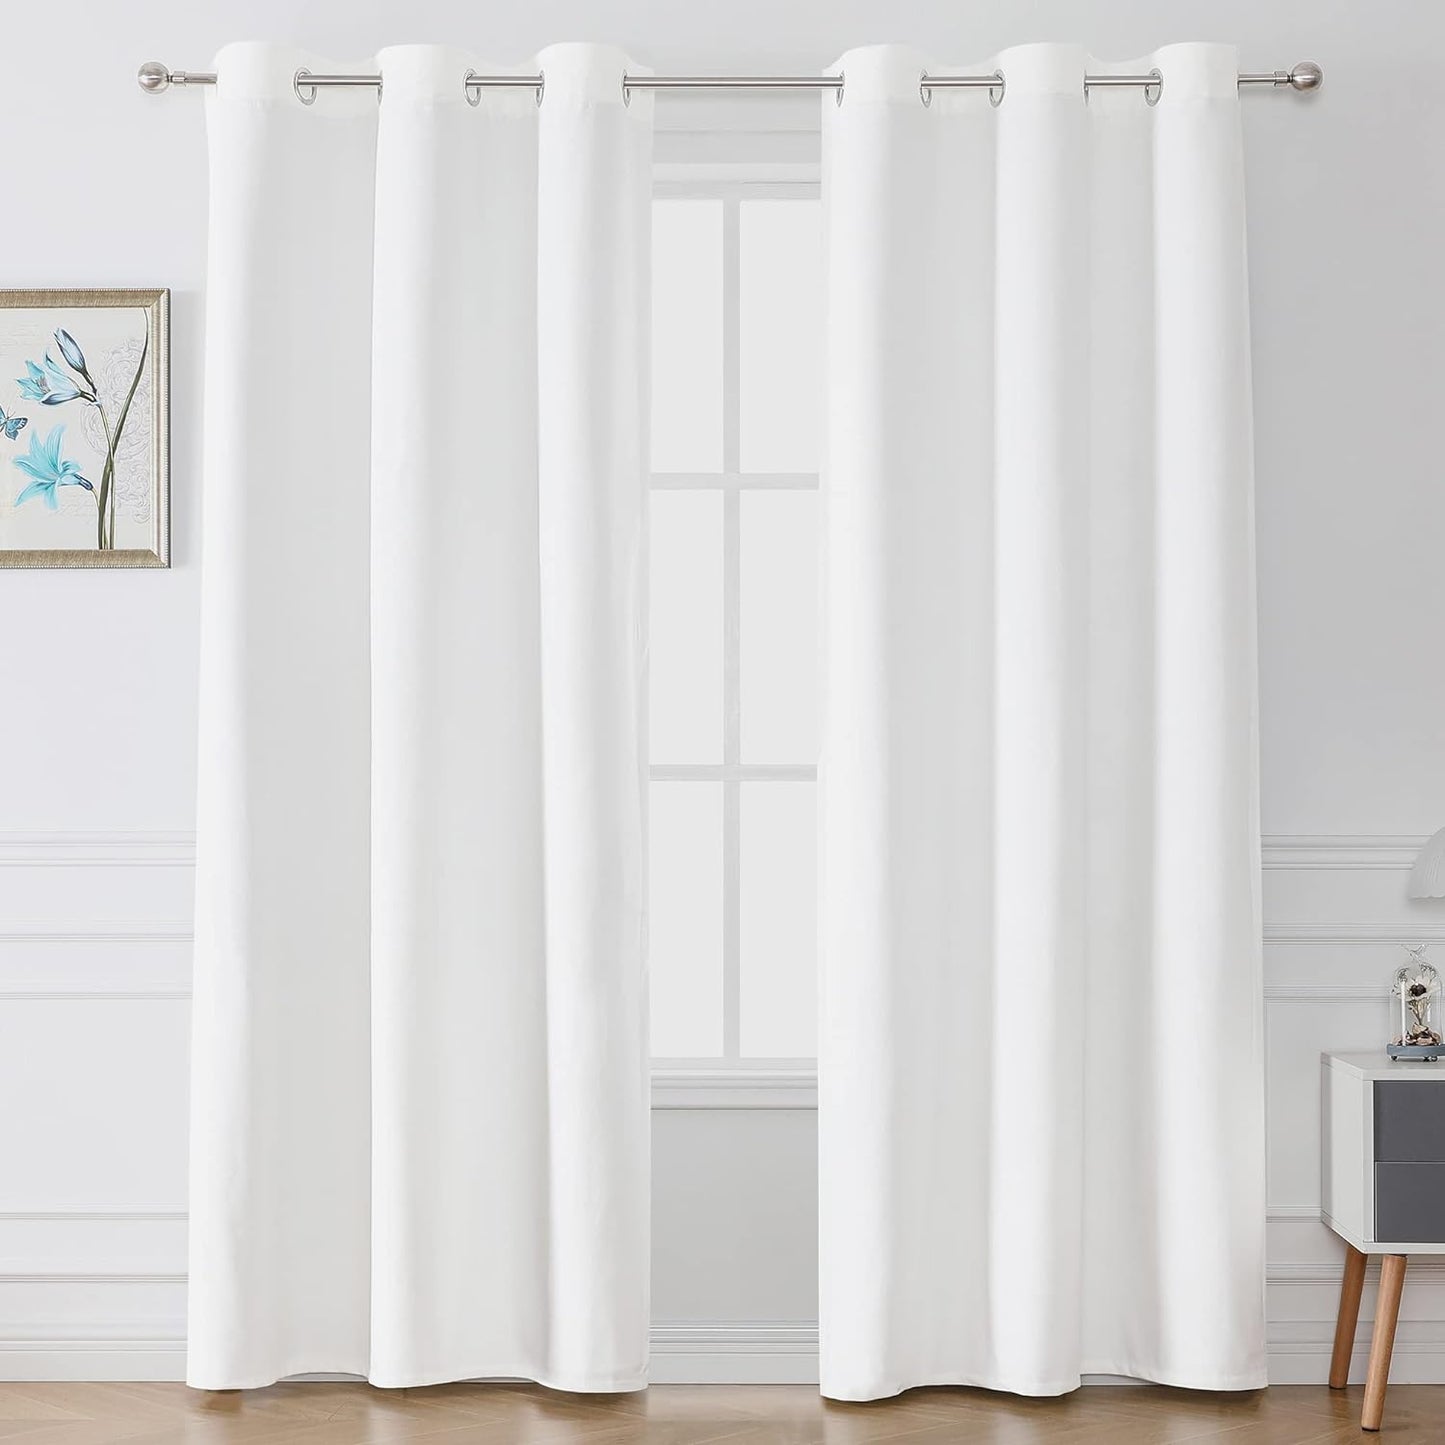 Victree Velvet Curtains for Bedroom, Blackout Curtains 52 X 84 Inch Length - Room Darkening Sun Light Blocking Grommet Window Drapes for Living Room, 2 Panels, Navy  Victree Bleach White 42 X 72 Inches 